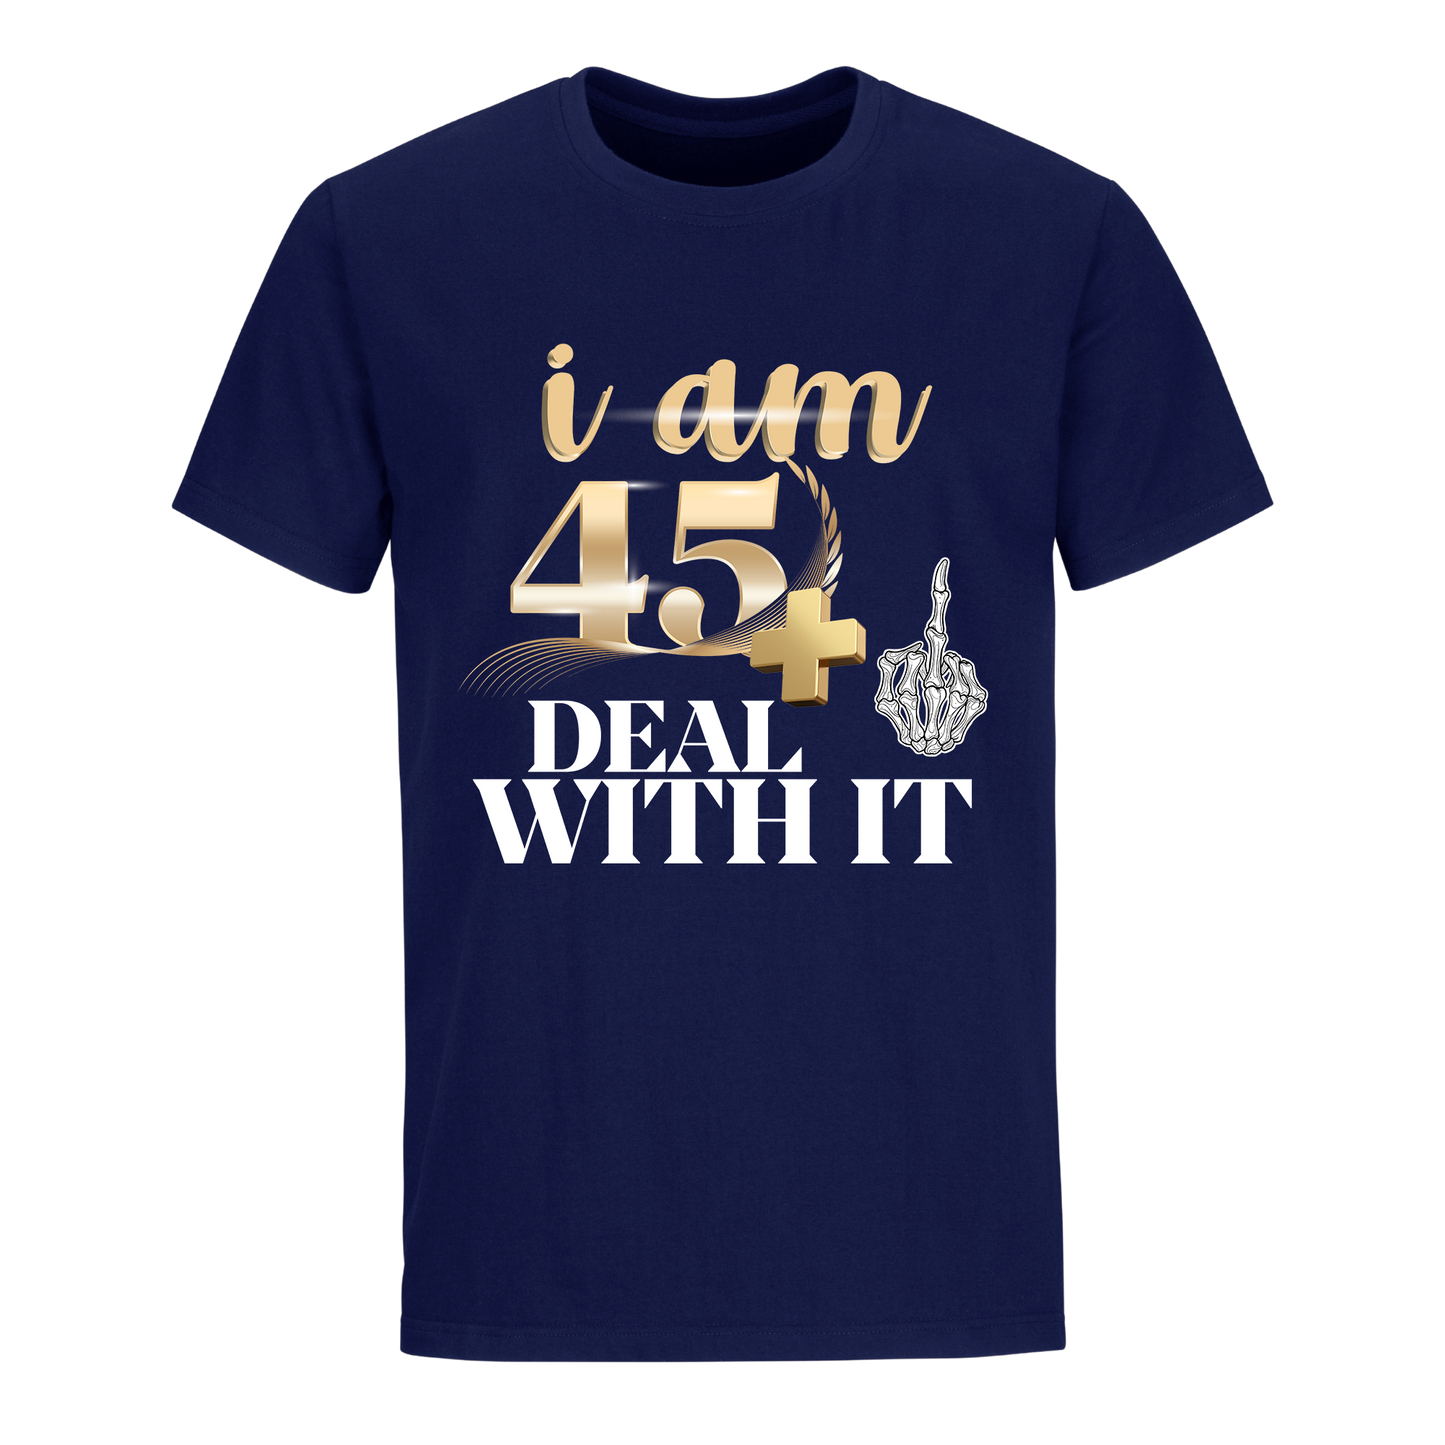 I'M 45 DEAL WITH IT UNISEX SHIRT